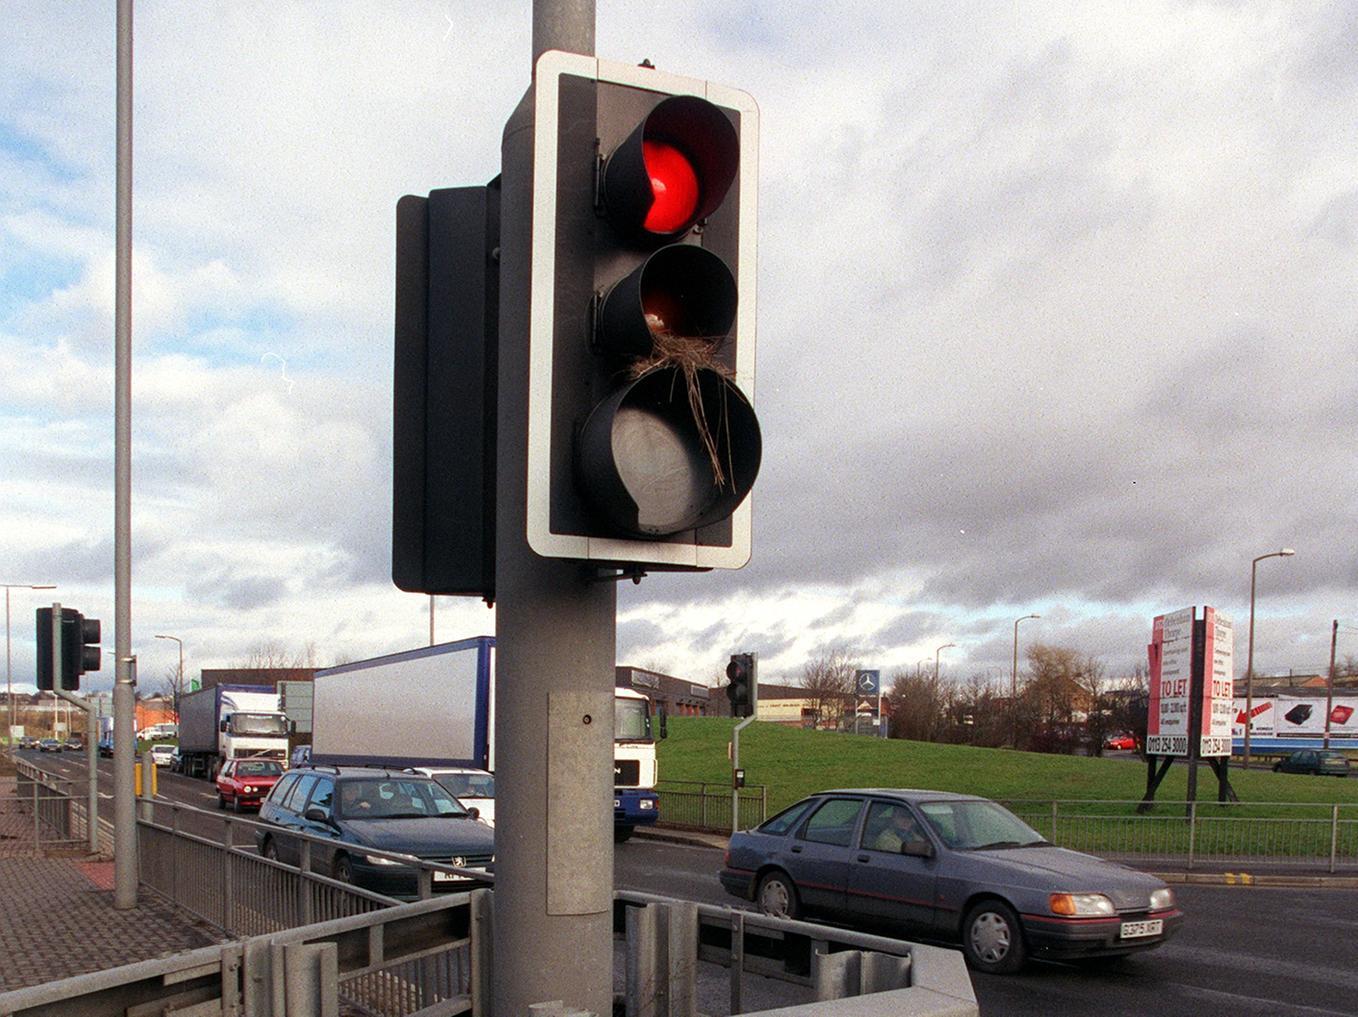 A bird was nesting in the traffic lights at the junction of Elland Road and Leeds Ring Road.